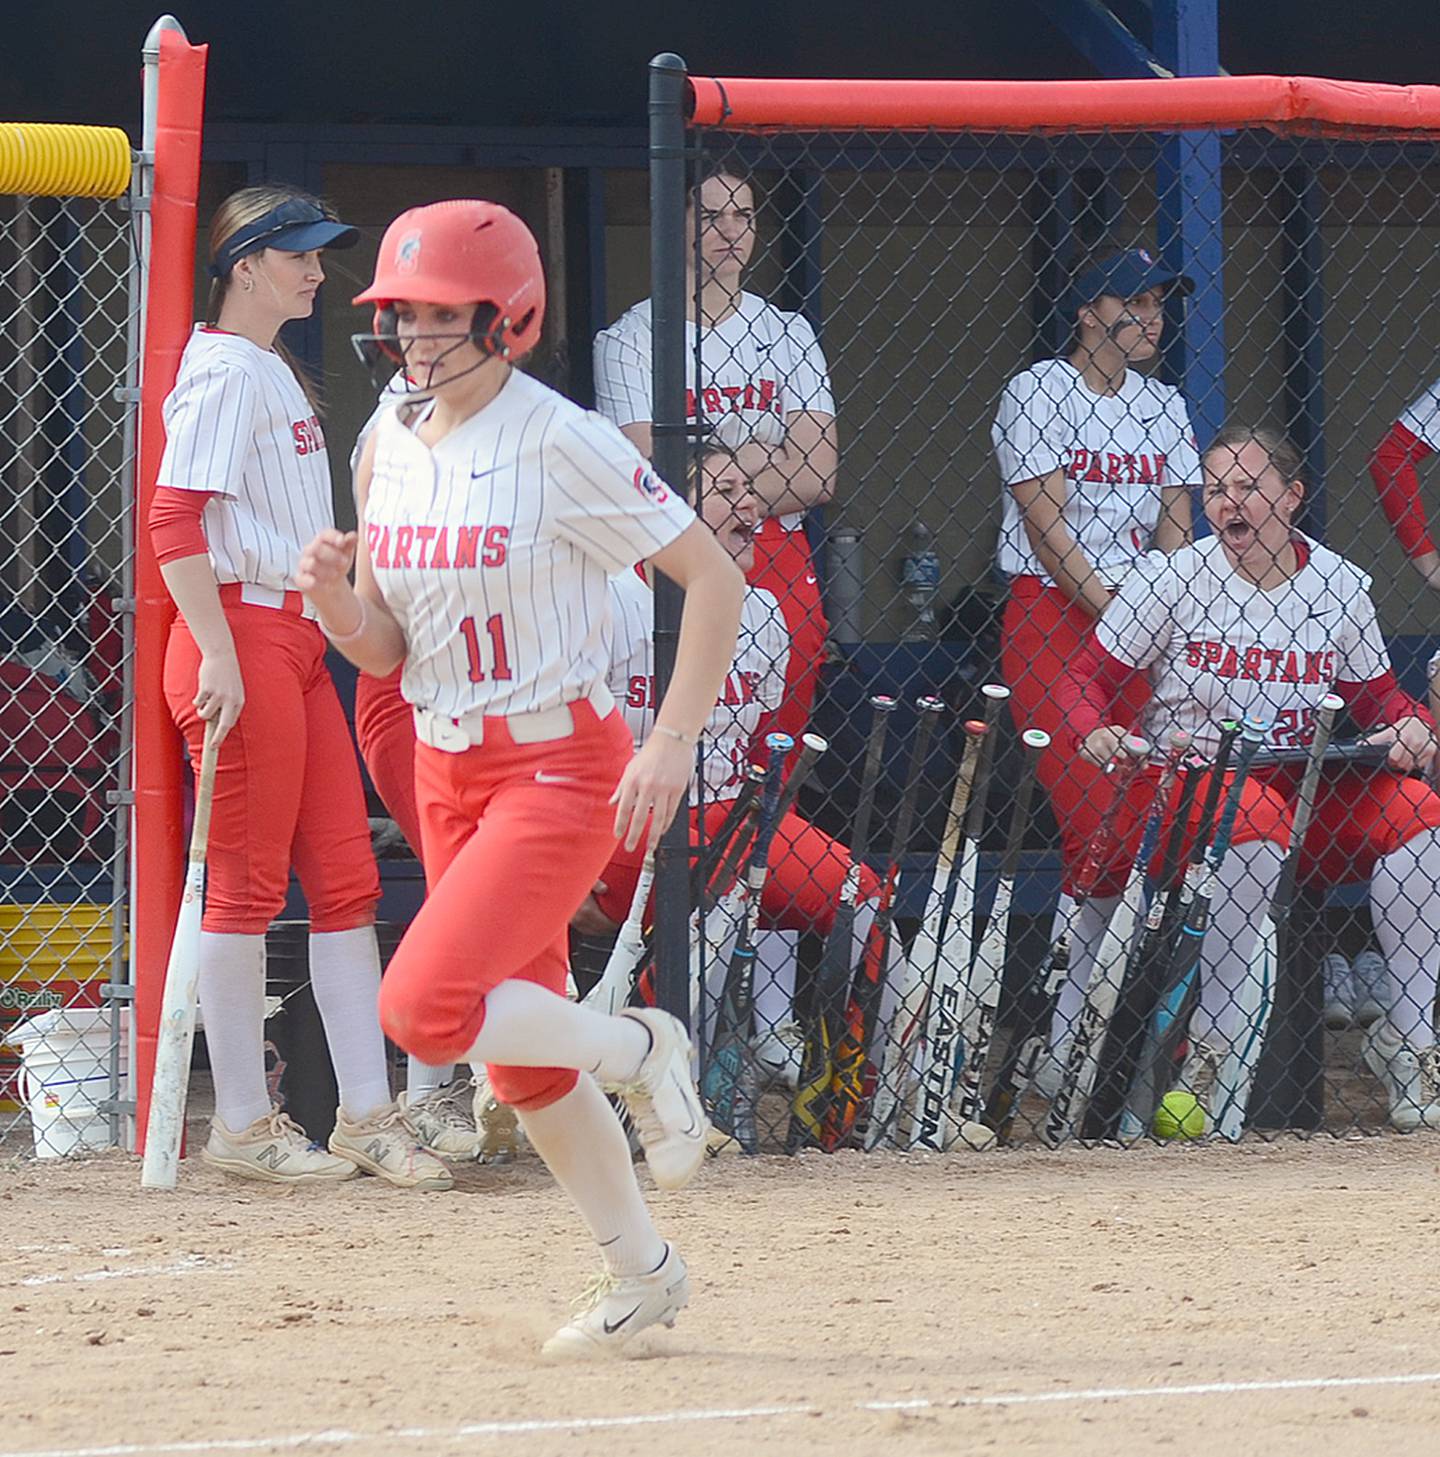 Southwestern's Kaitlyn Mitchell (11) scores on a single by Lily McCrae in Friday's 7-5 loss to Marshalltown. Mitchell had two hits in the game.